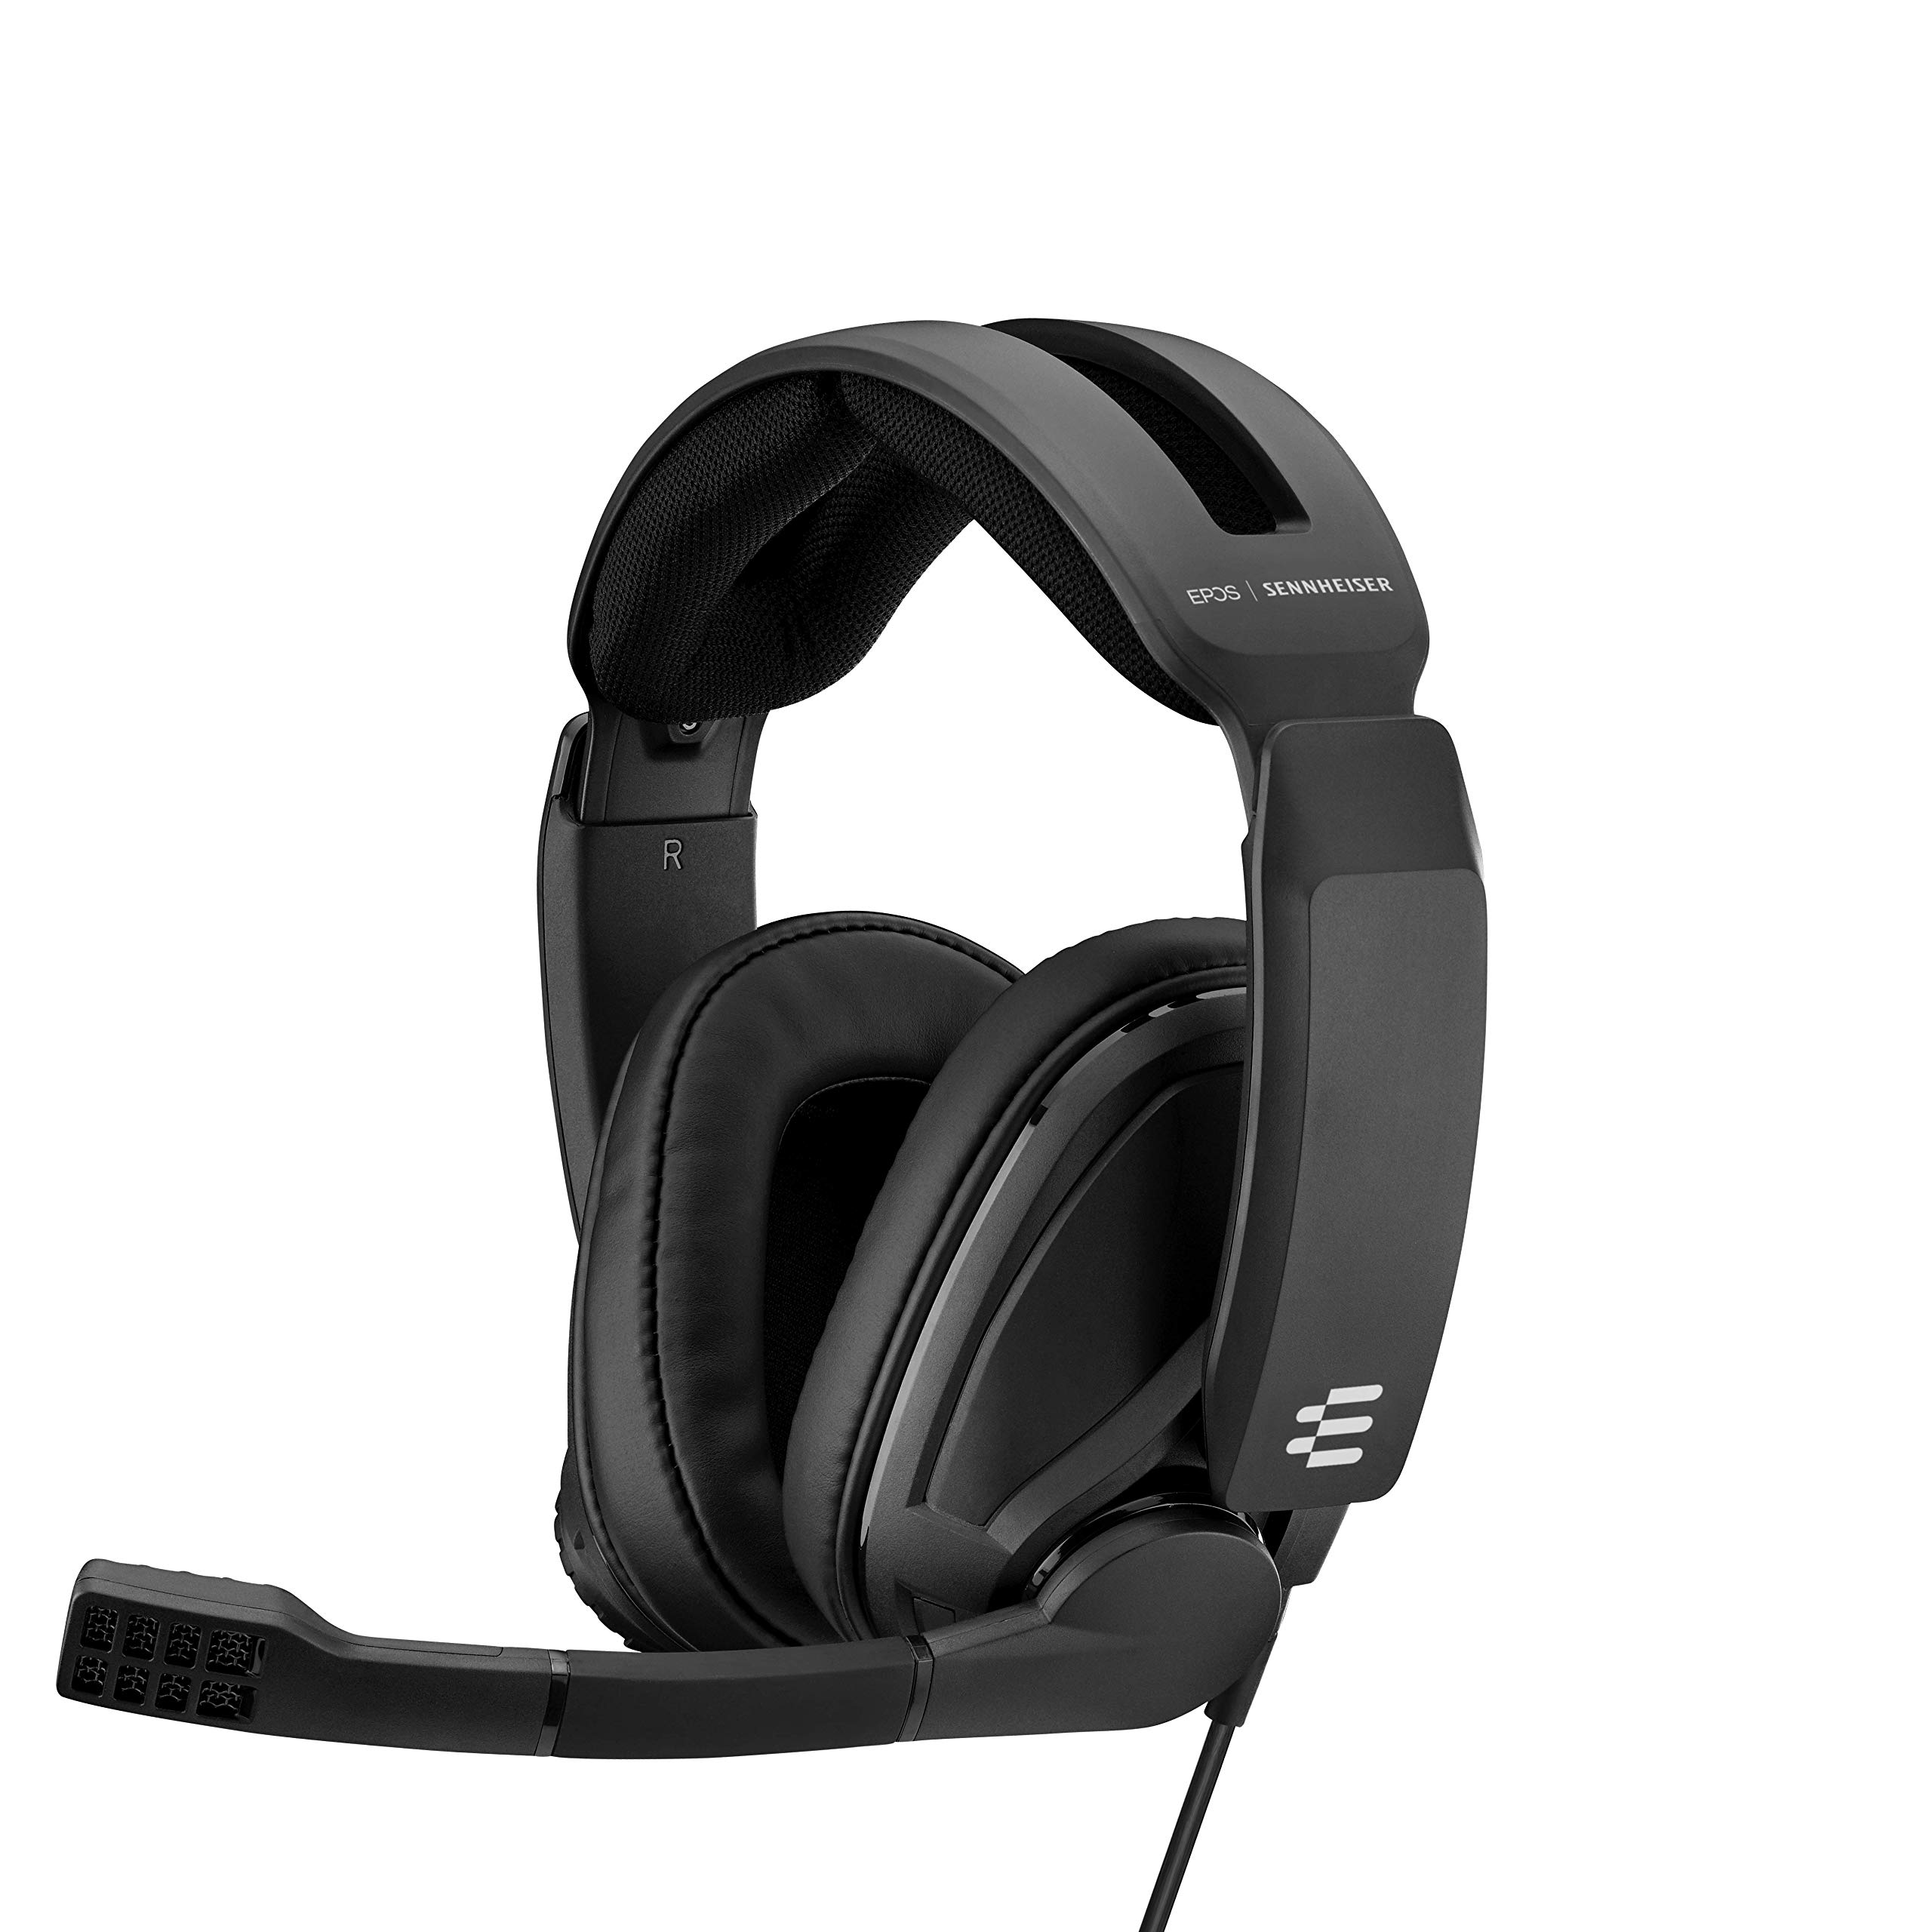 EPOS I Sennheiser GSP 302 Gaming Headset with Noise-Cancelling Mic, Flip-to-Mute, Comfortable Memory Foam Ear Pads, Headphones for PC, Mac, Xbox One, PS4, Nintendo Switch, and Smartphone compatible.